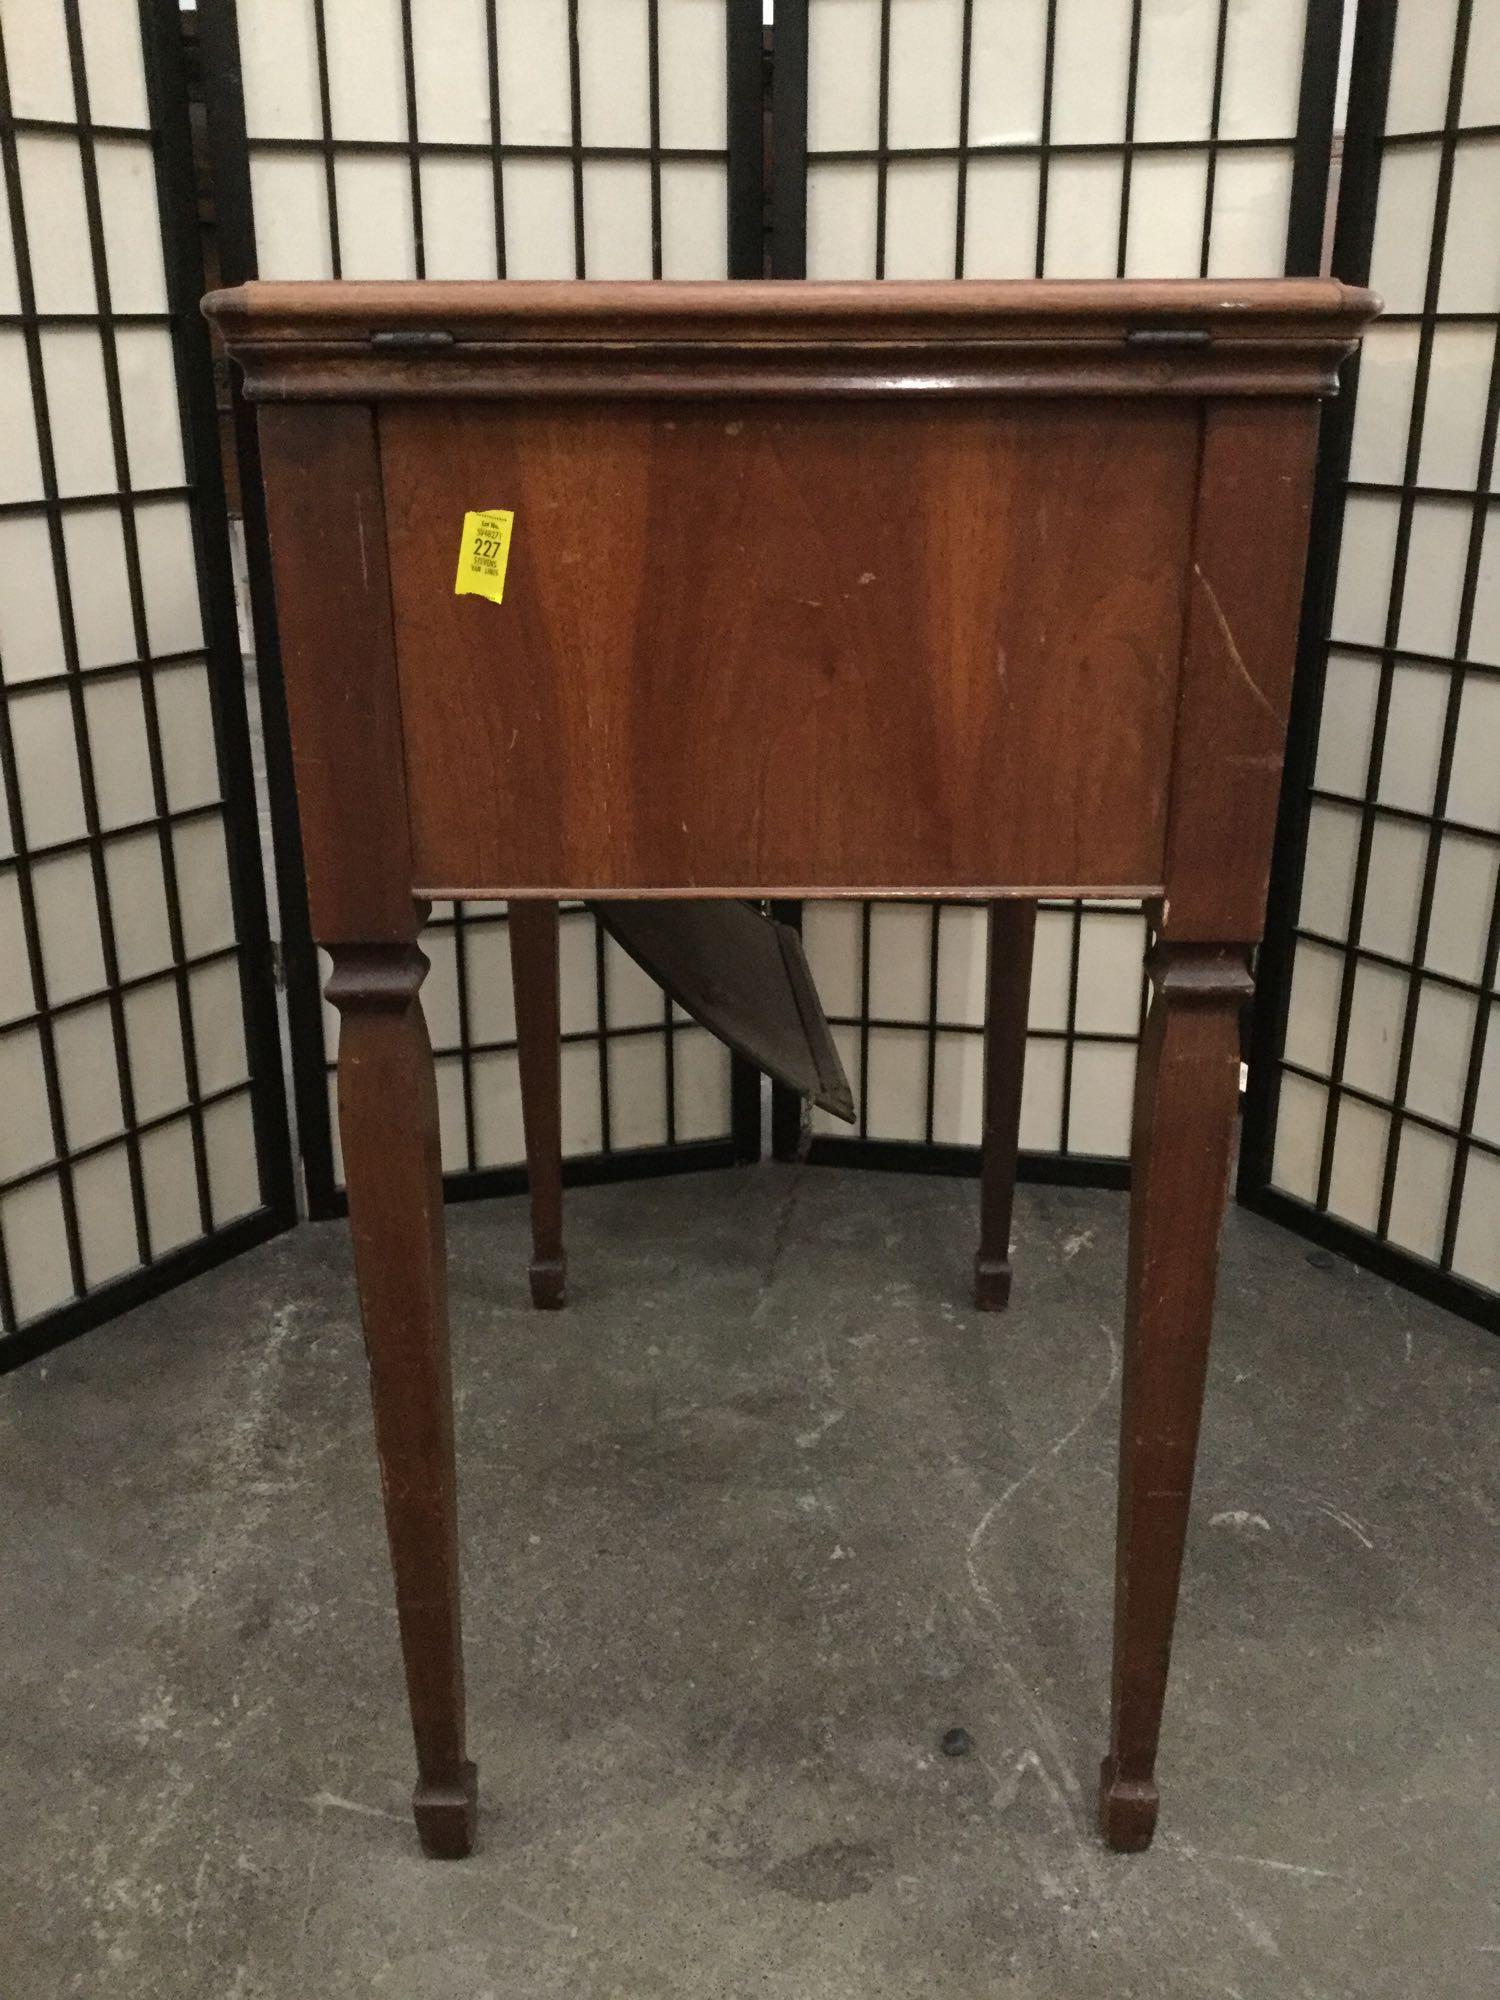 Vintage maple sewing cabinet with no machine, worn top - sold as is